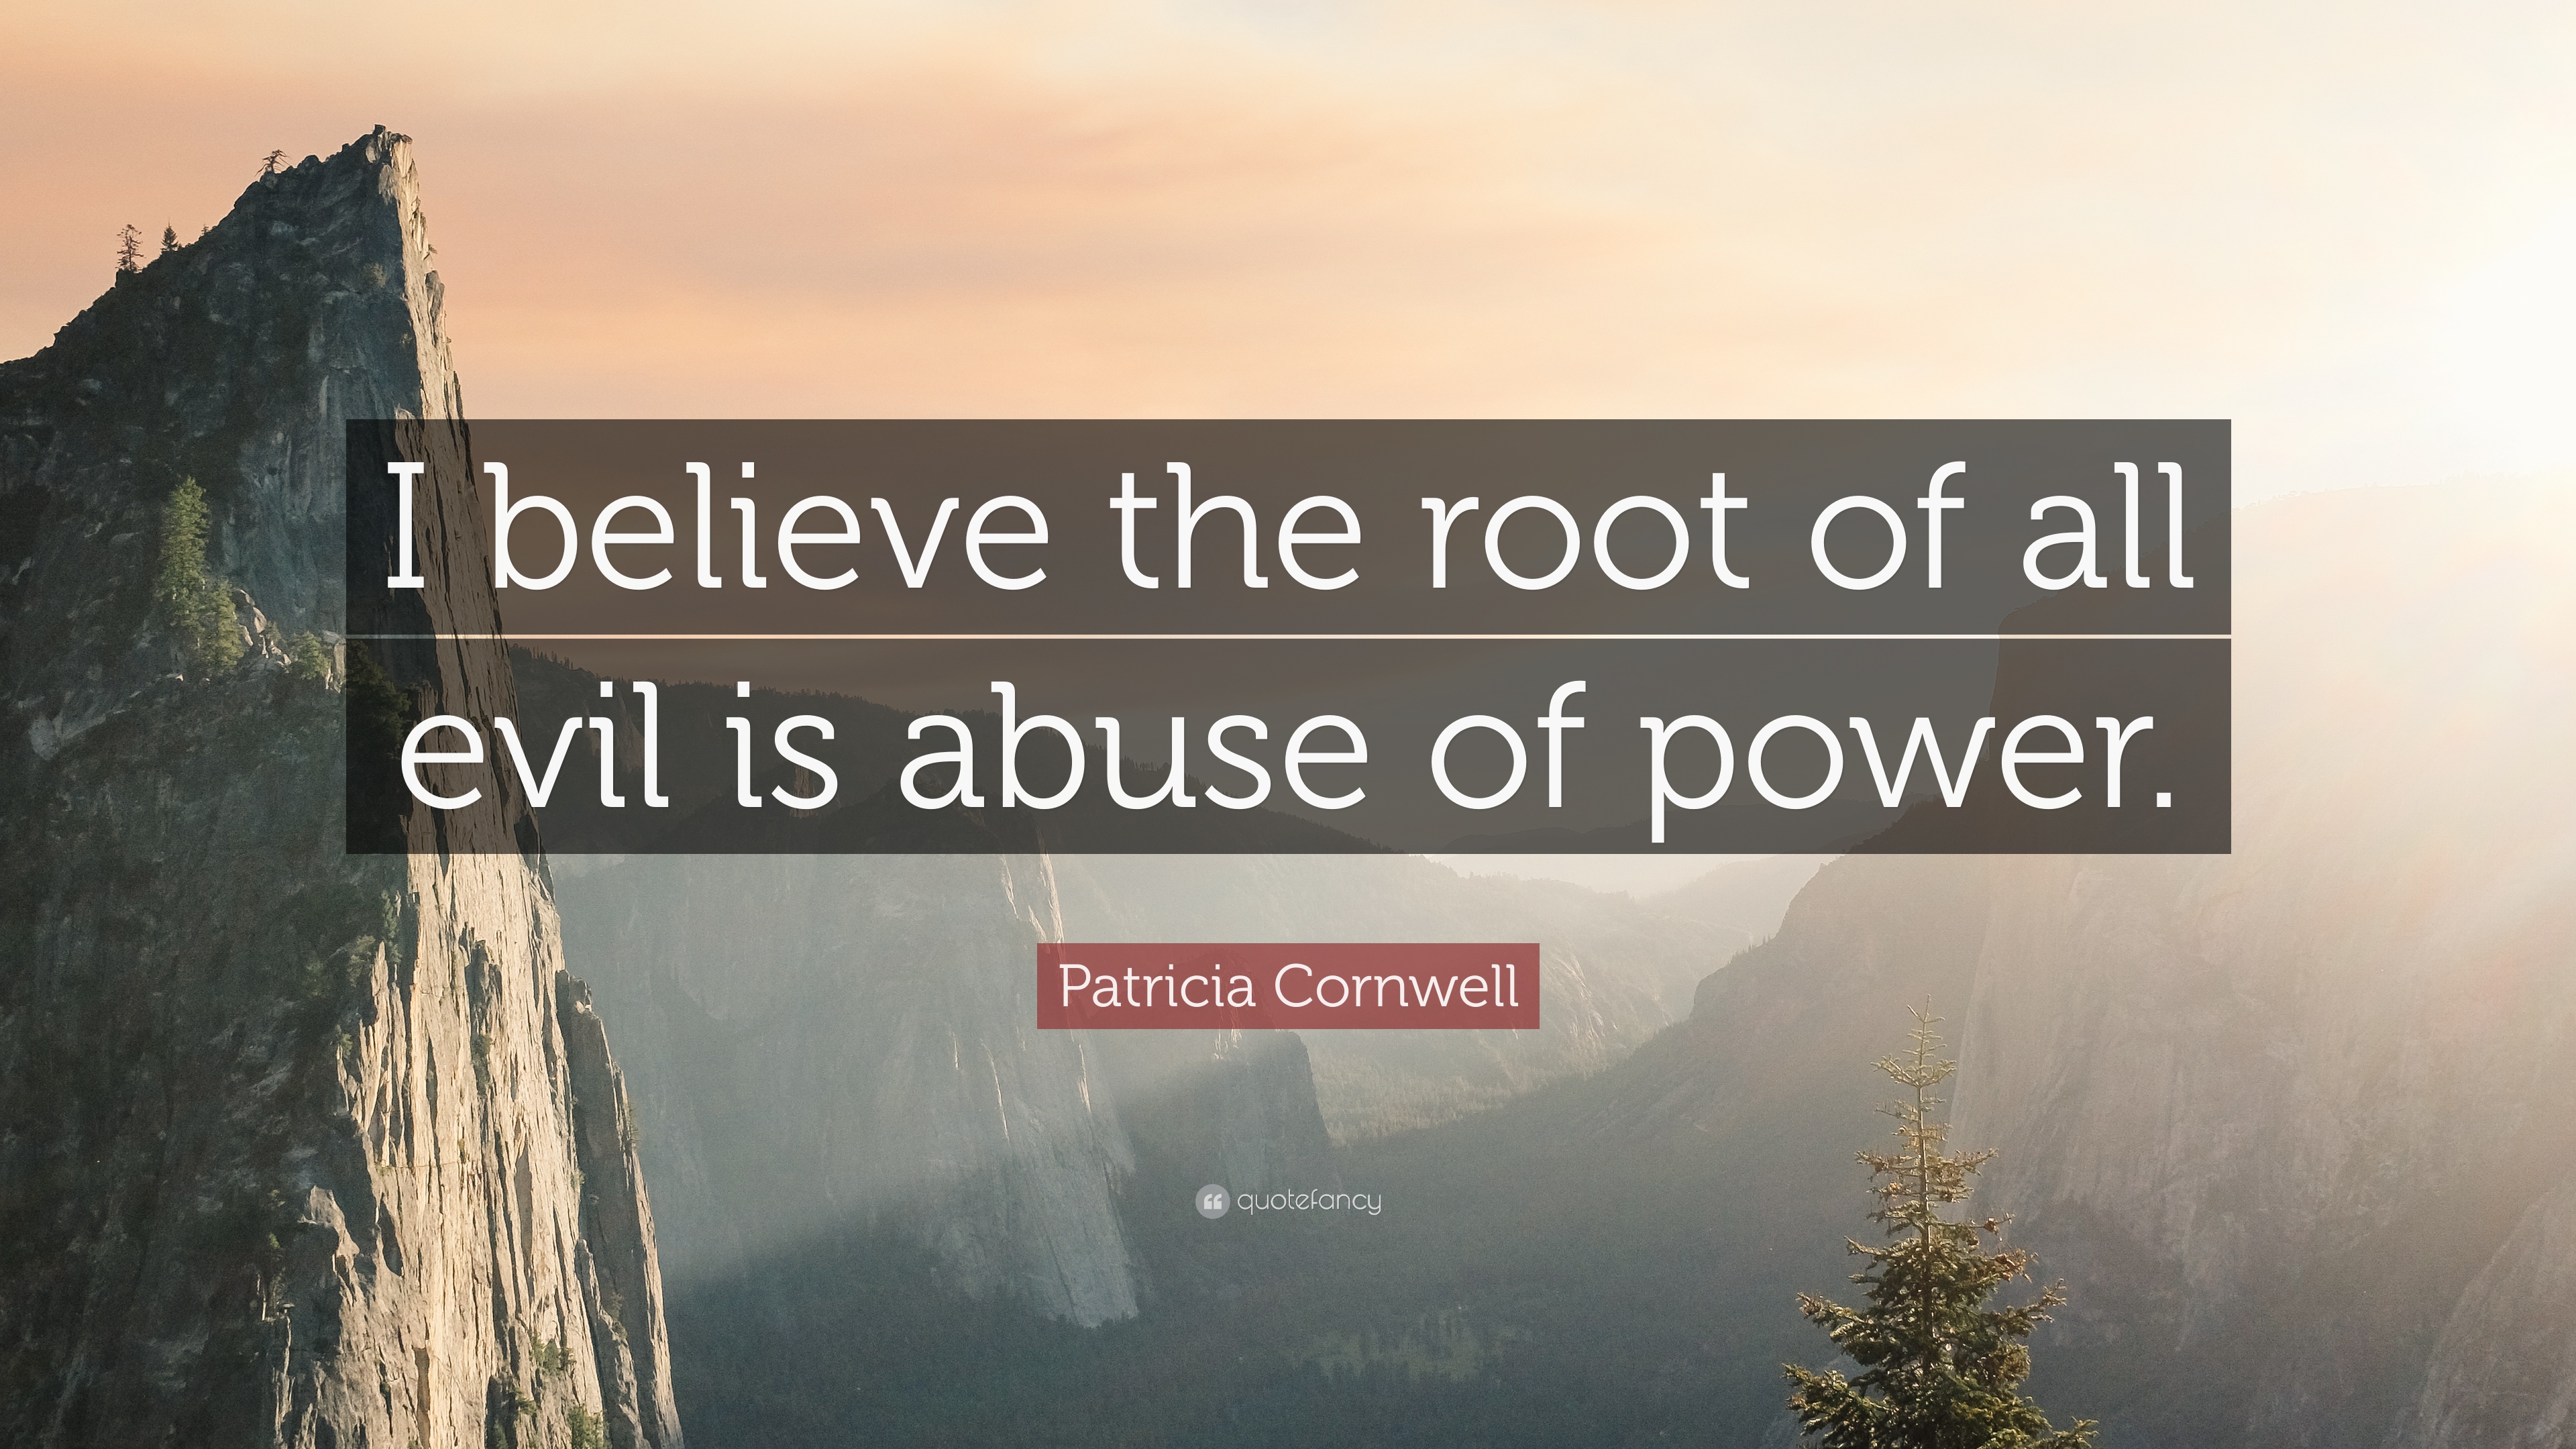 Patricia Cornwell Quote: “I believe the root of all evil is abuse